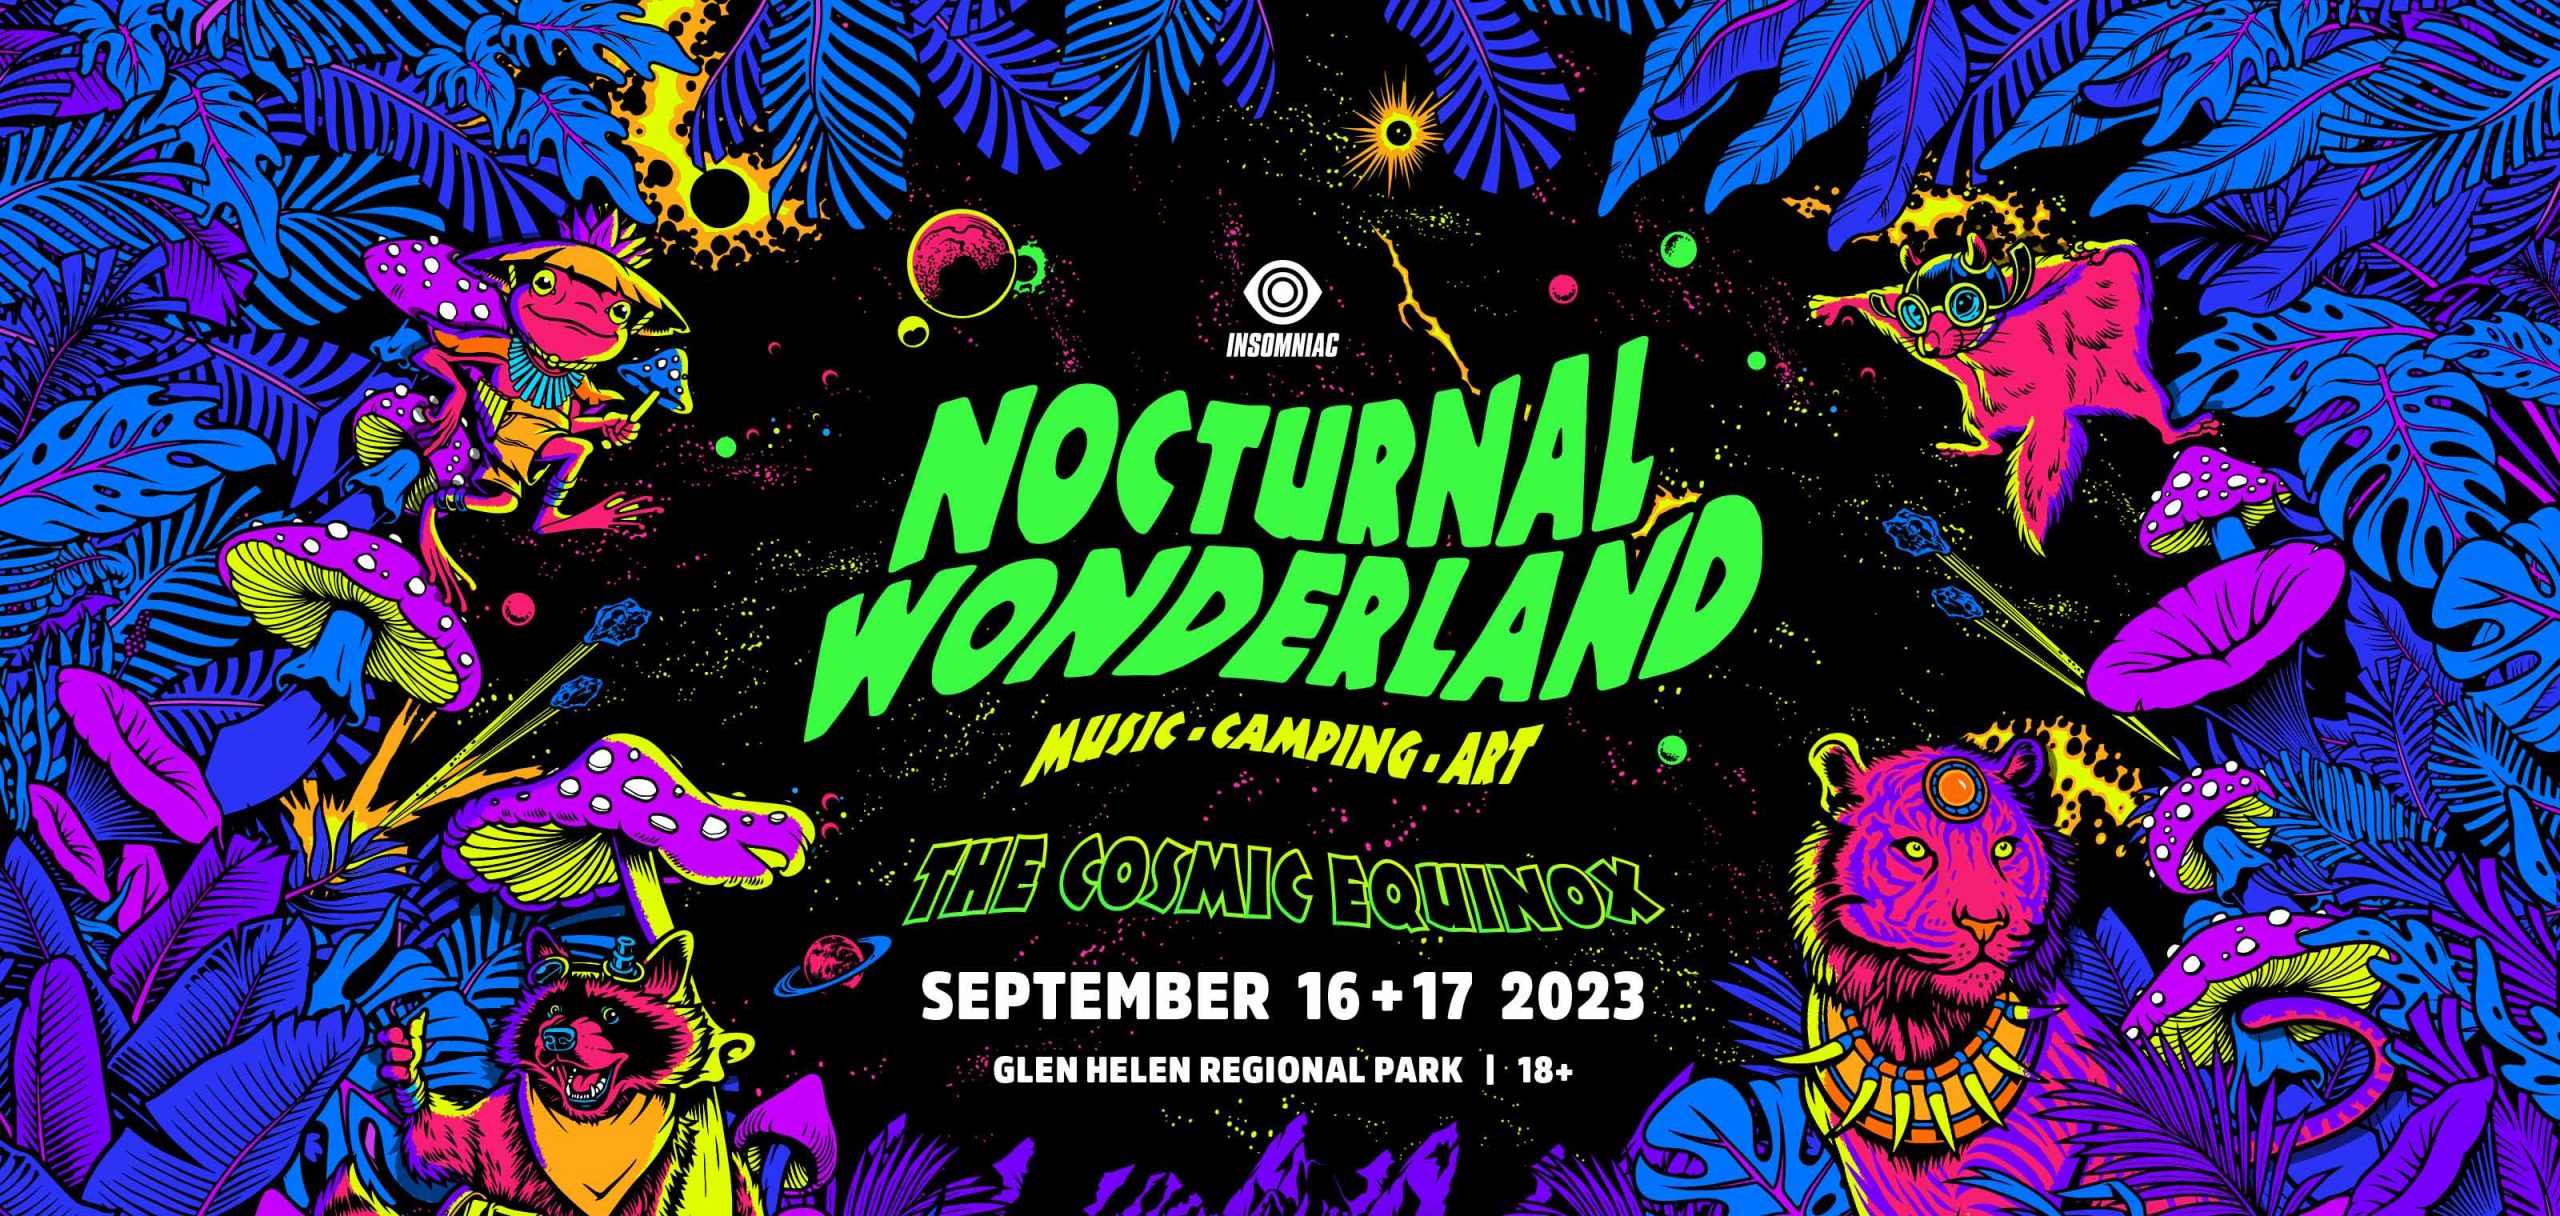 Nocturnal Wonderland 2023 Dates and Tickets Announced